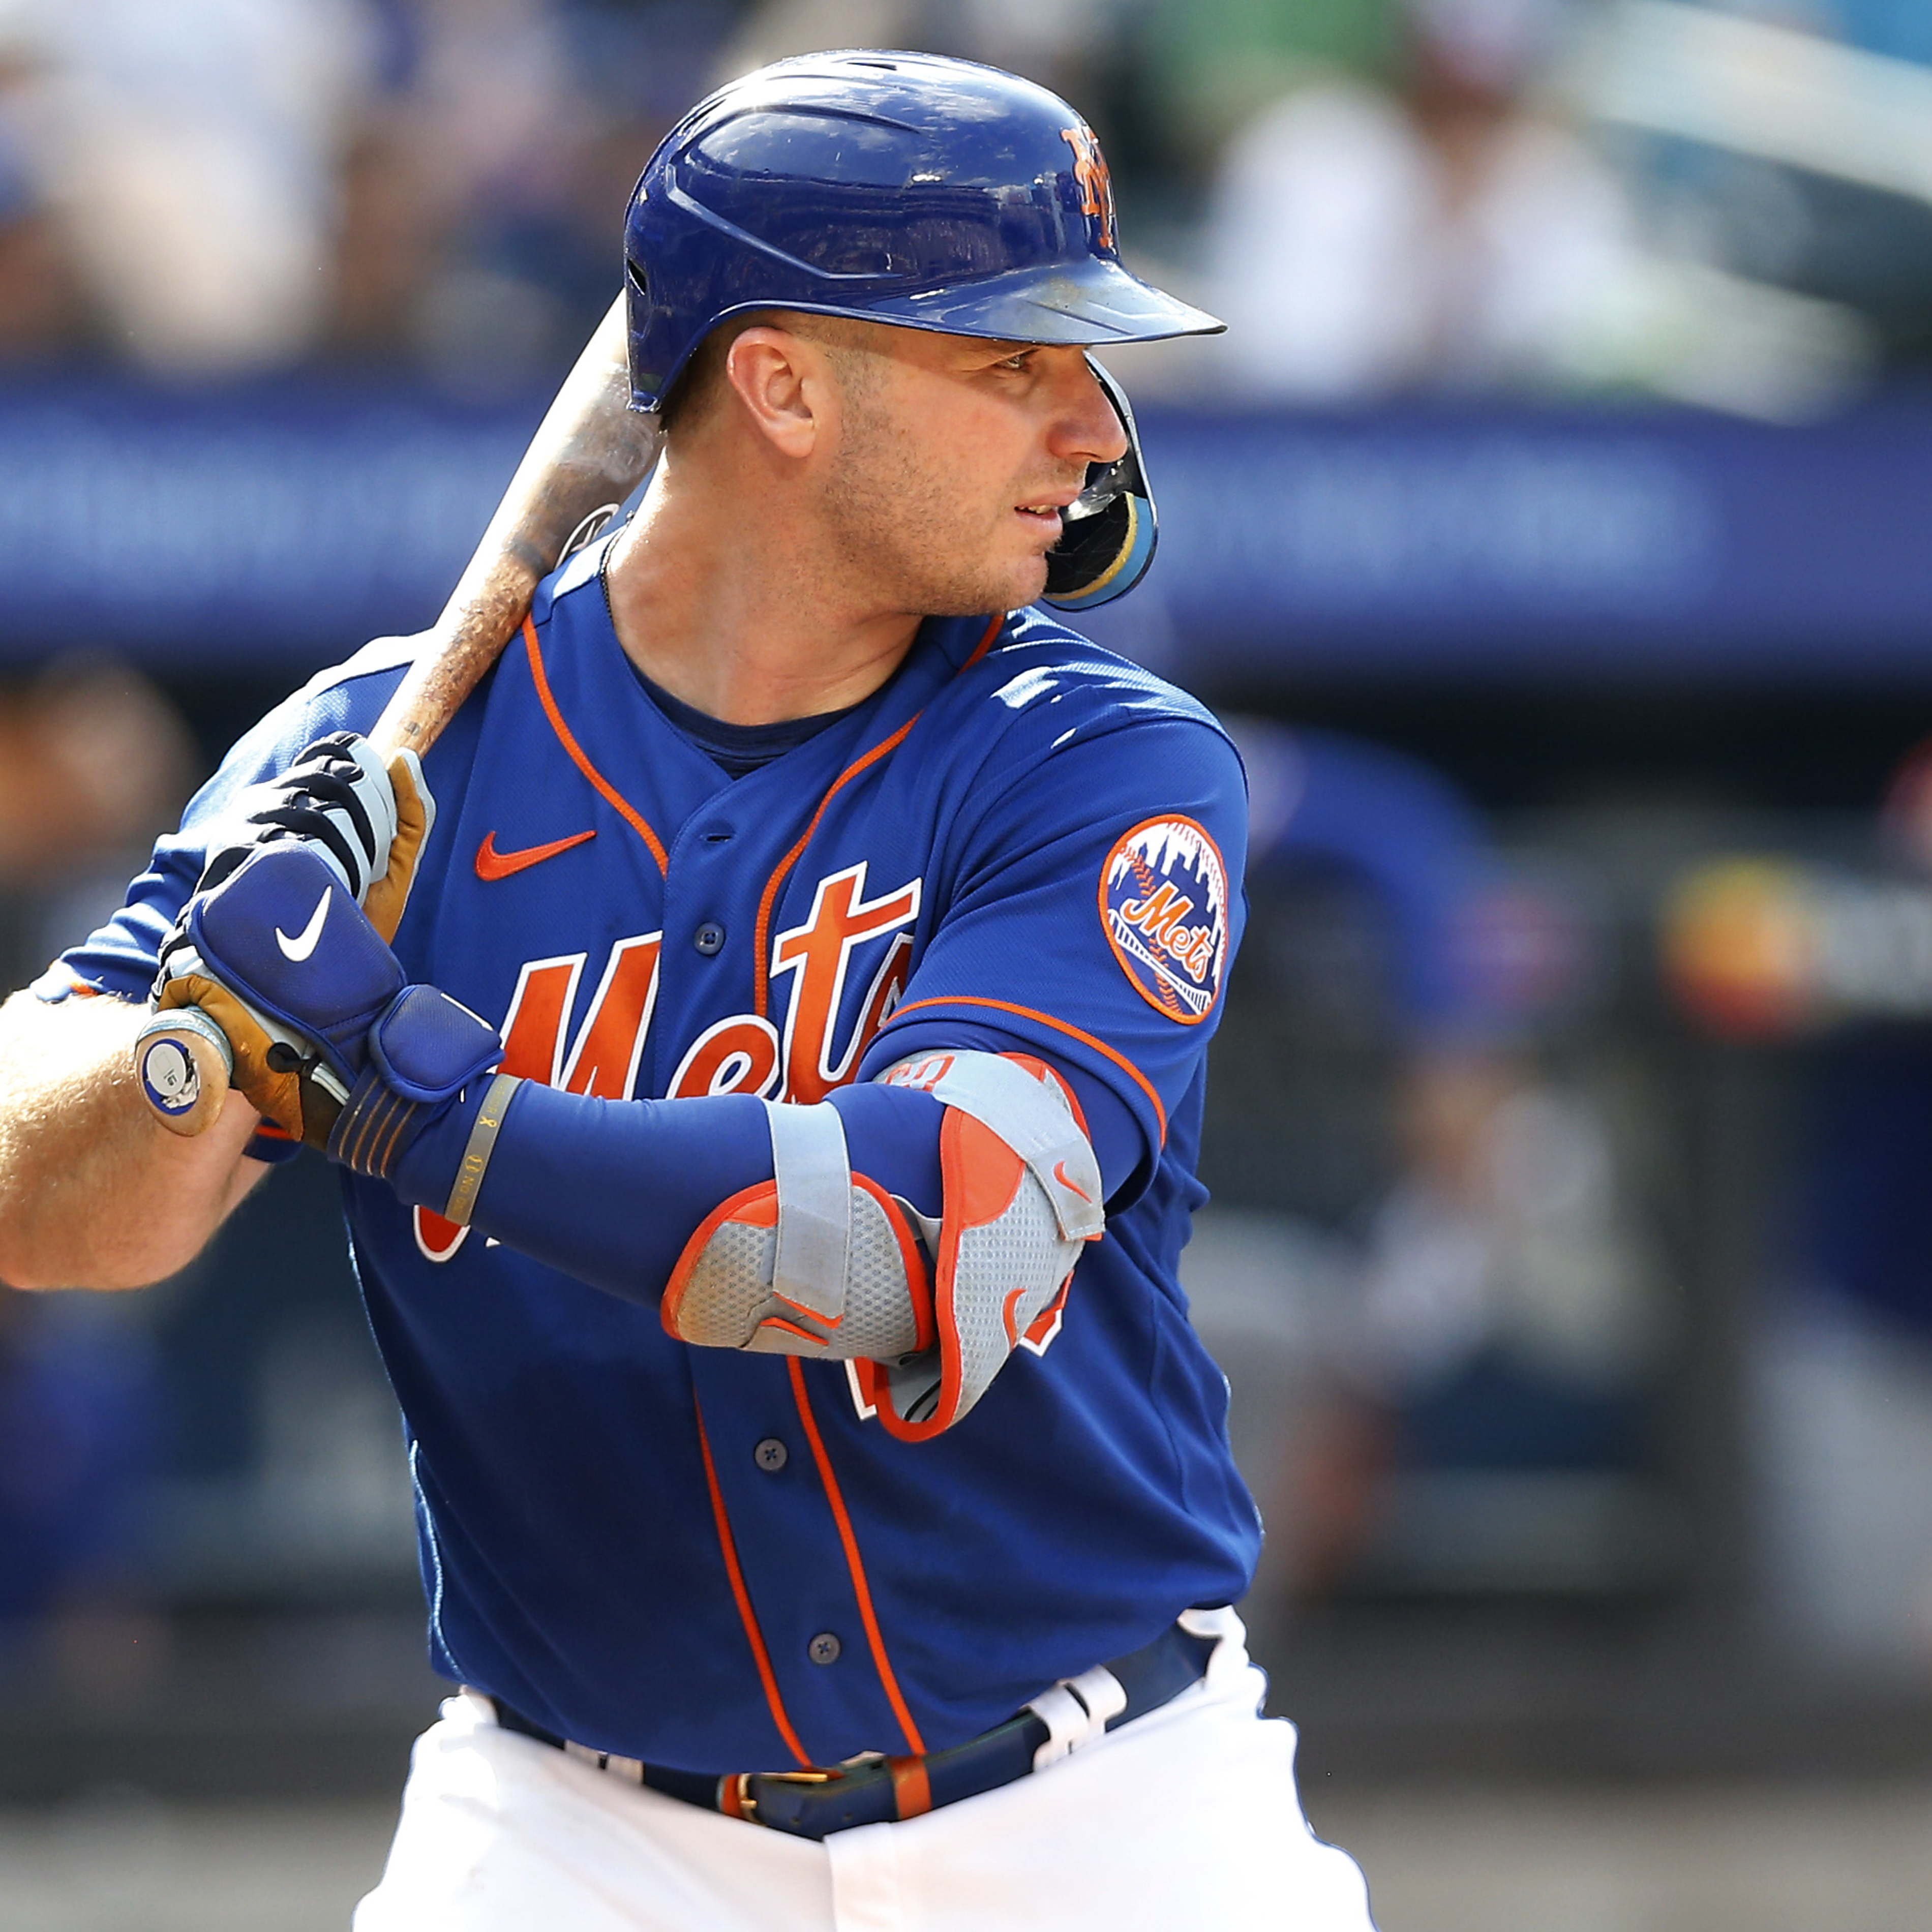 Mets’ Pete Alonso, 2-Time Defending Champ, to Compete in 2022 MLB Home Run Derby